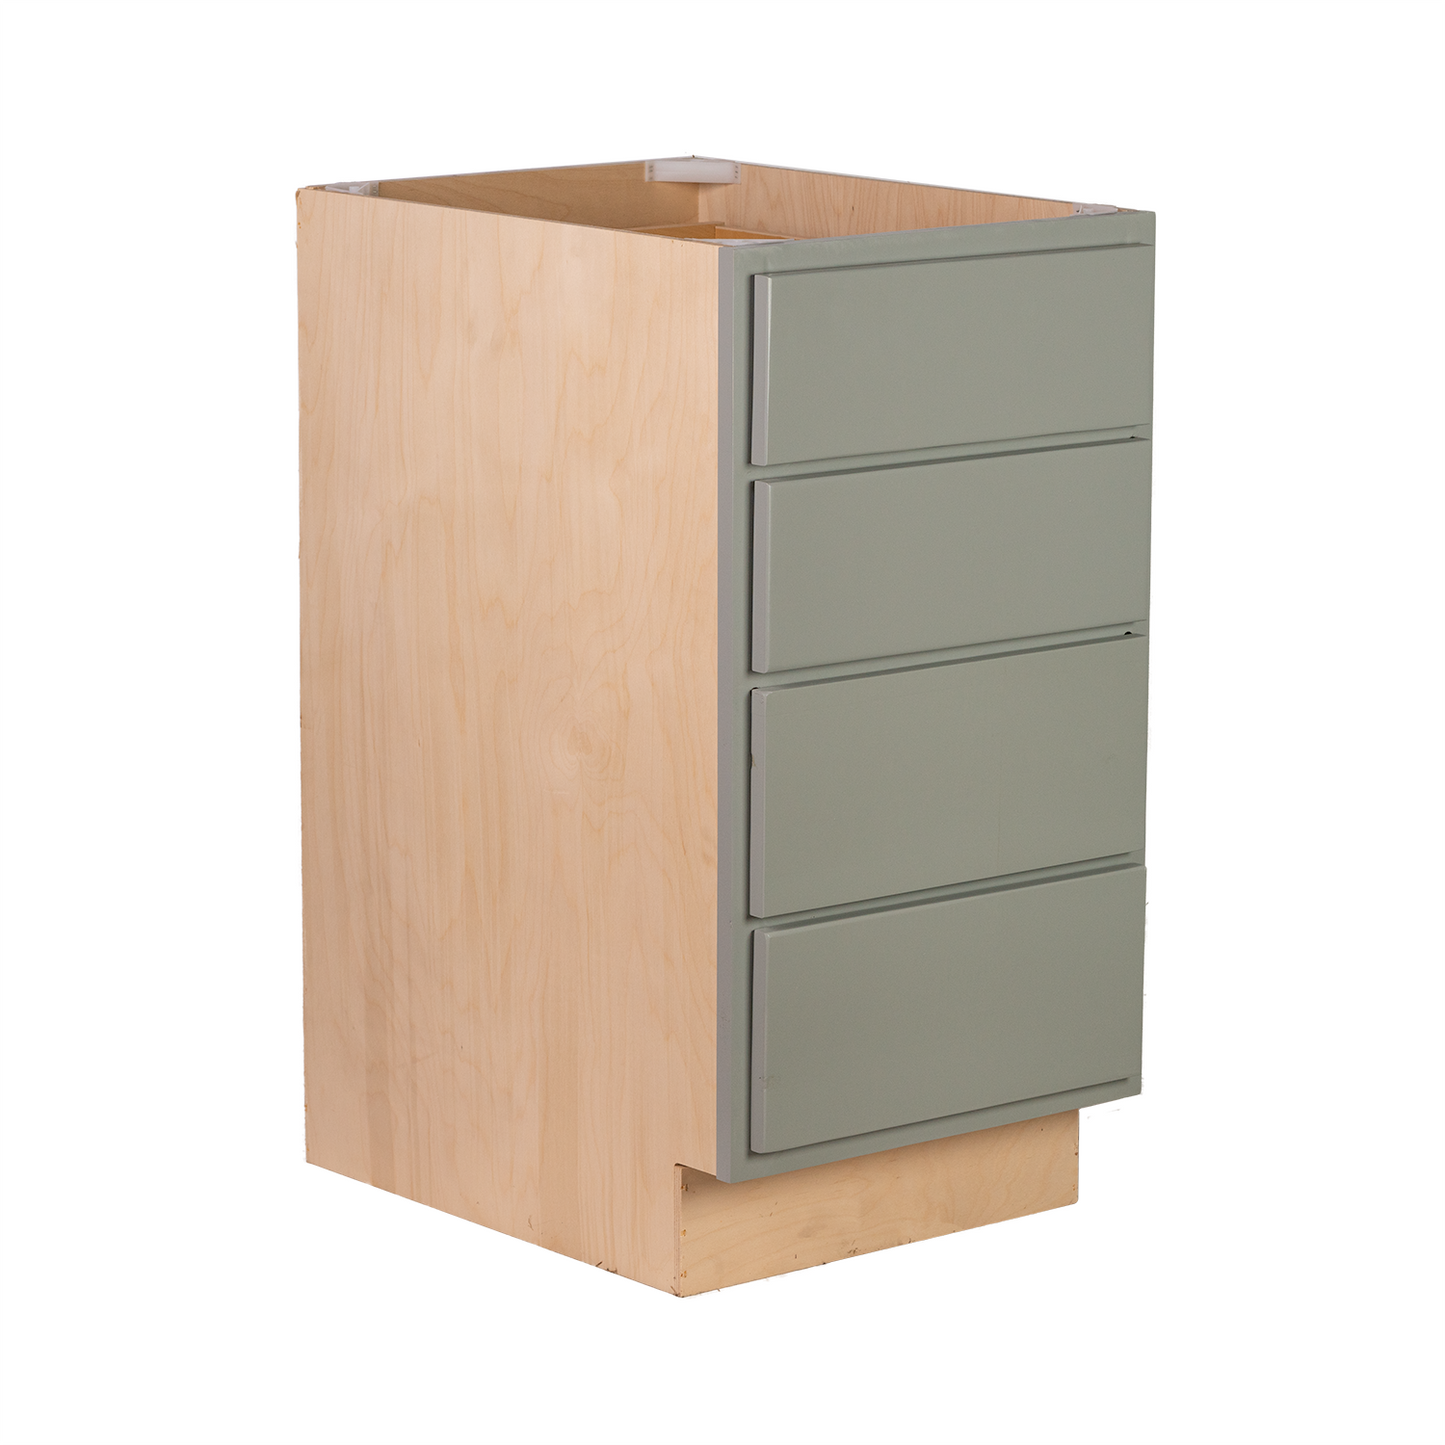 Quicklock RTA (Ready-to-Assemble) Magnetic Gray 4 Drawer Base Cabinet 34.5"H x (18", 24"W)